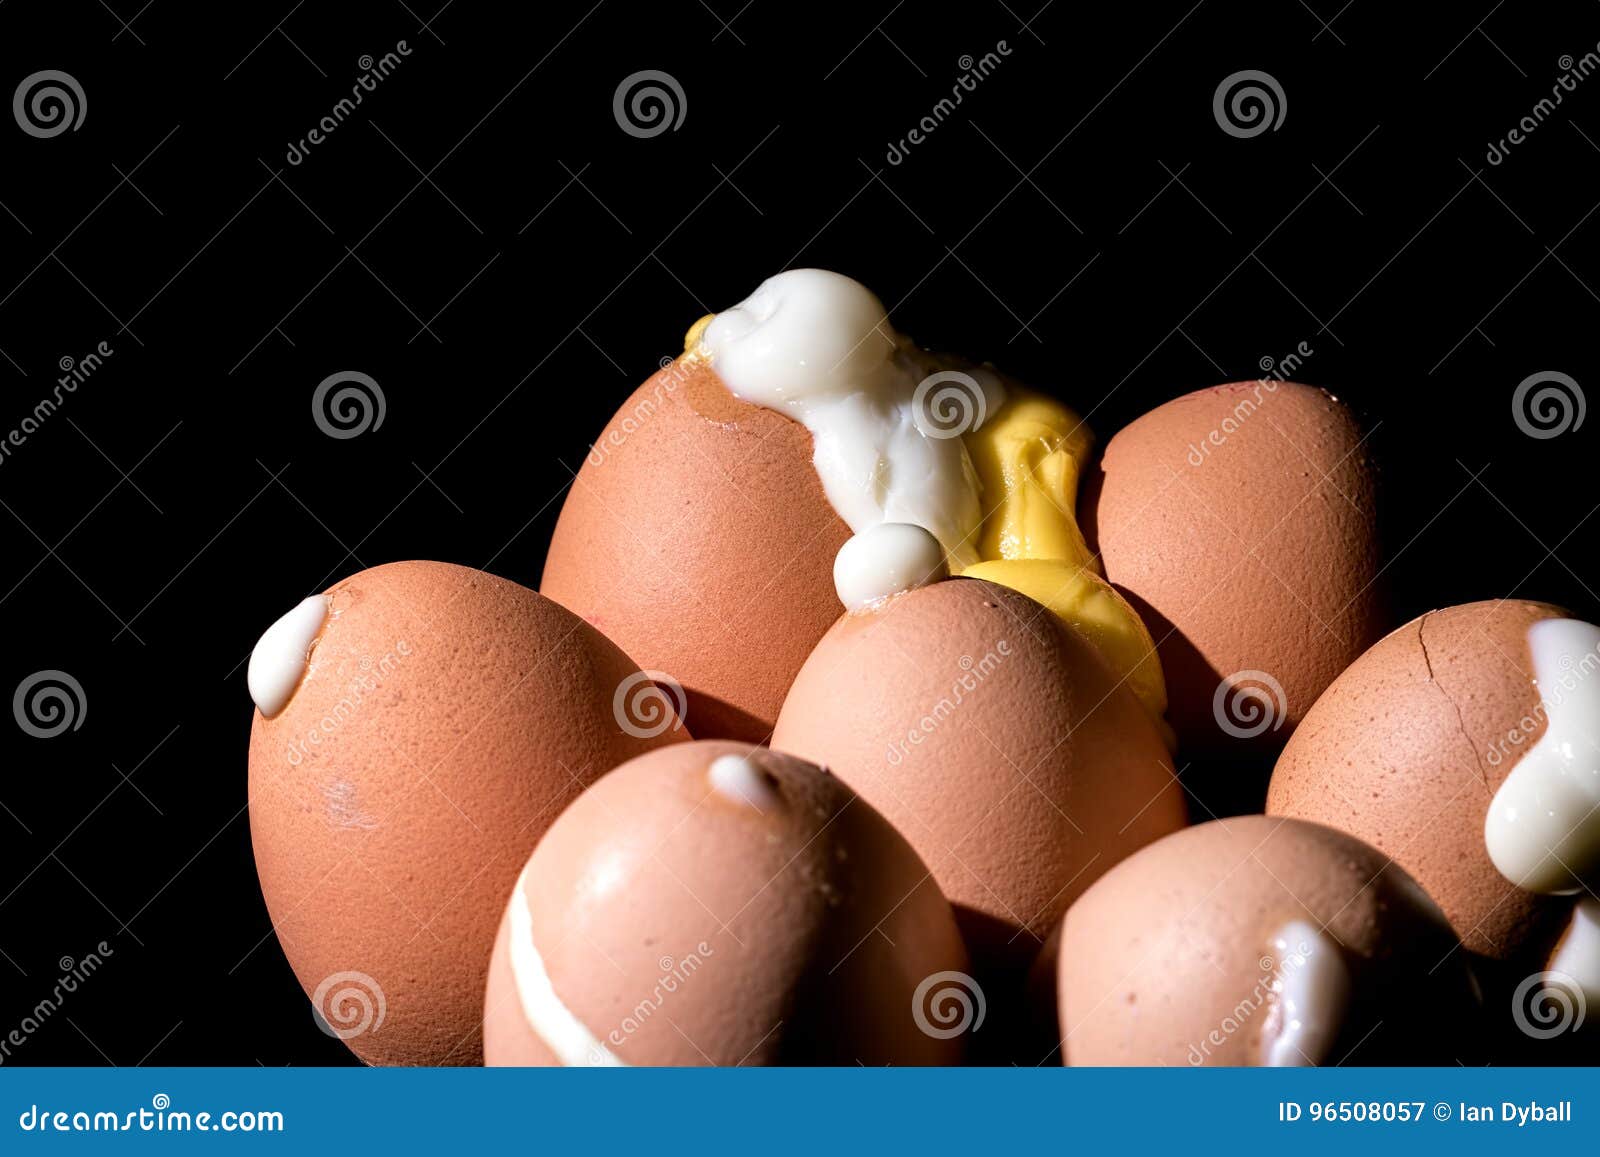 hard boiled eggs erupted from pierced and cracked shells.